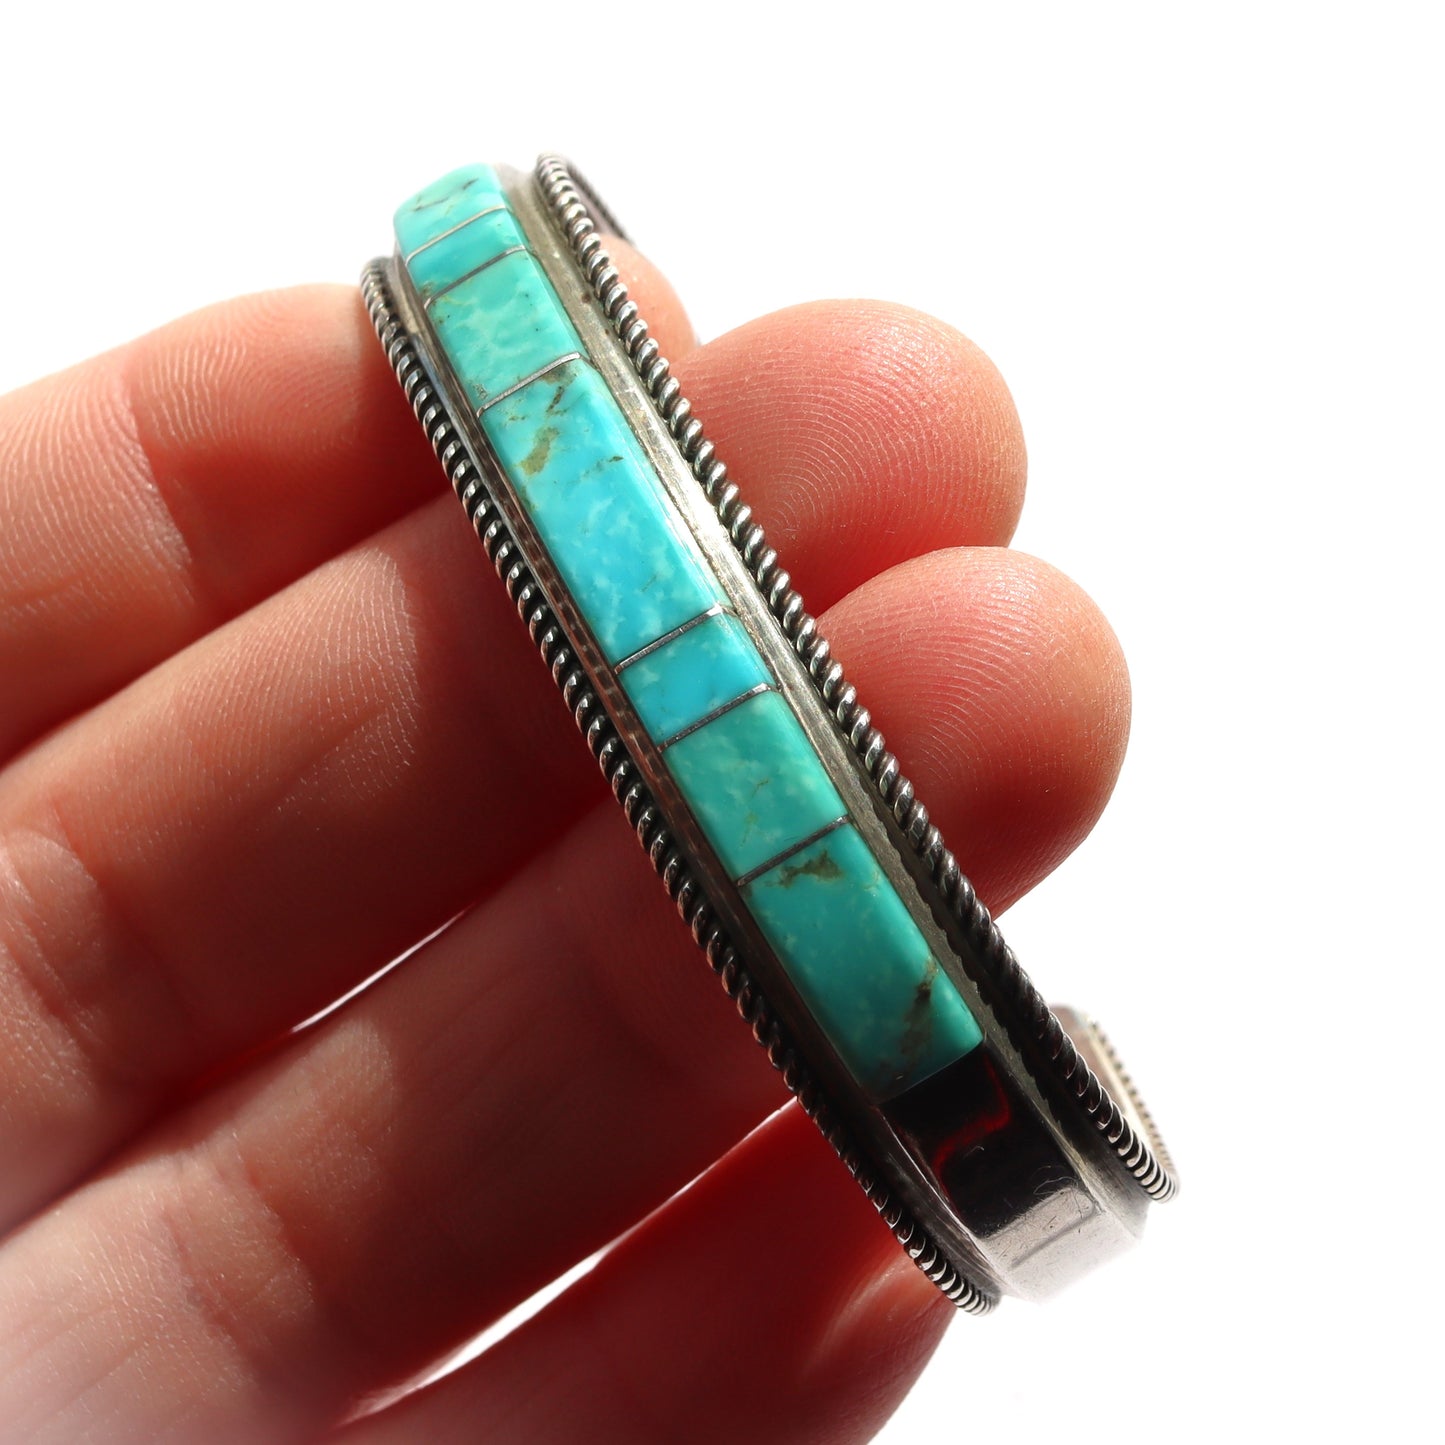 Vintage Navajo Sterling Silver Turquoise Inlay Cuff Bracelet Signed Foutz